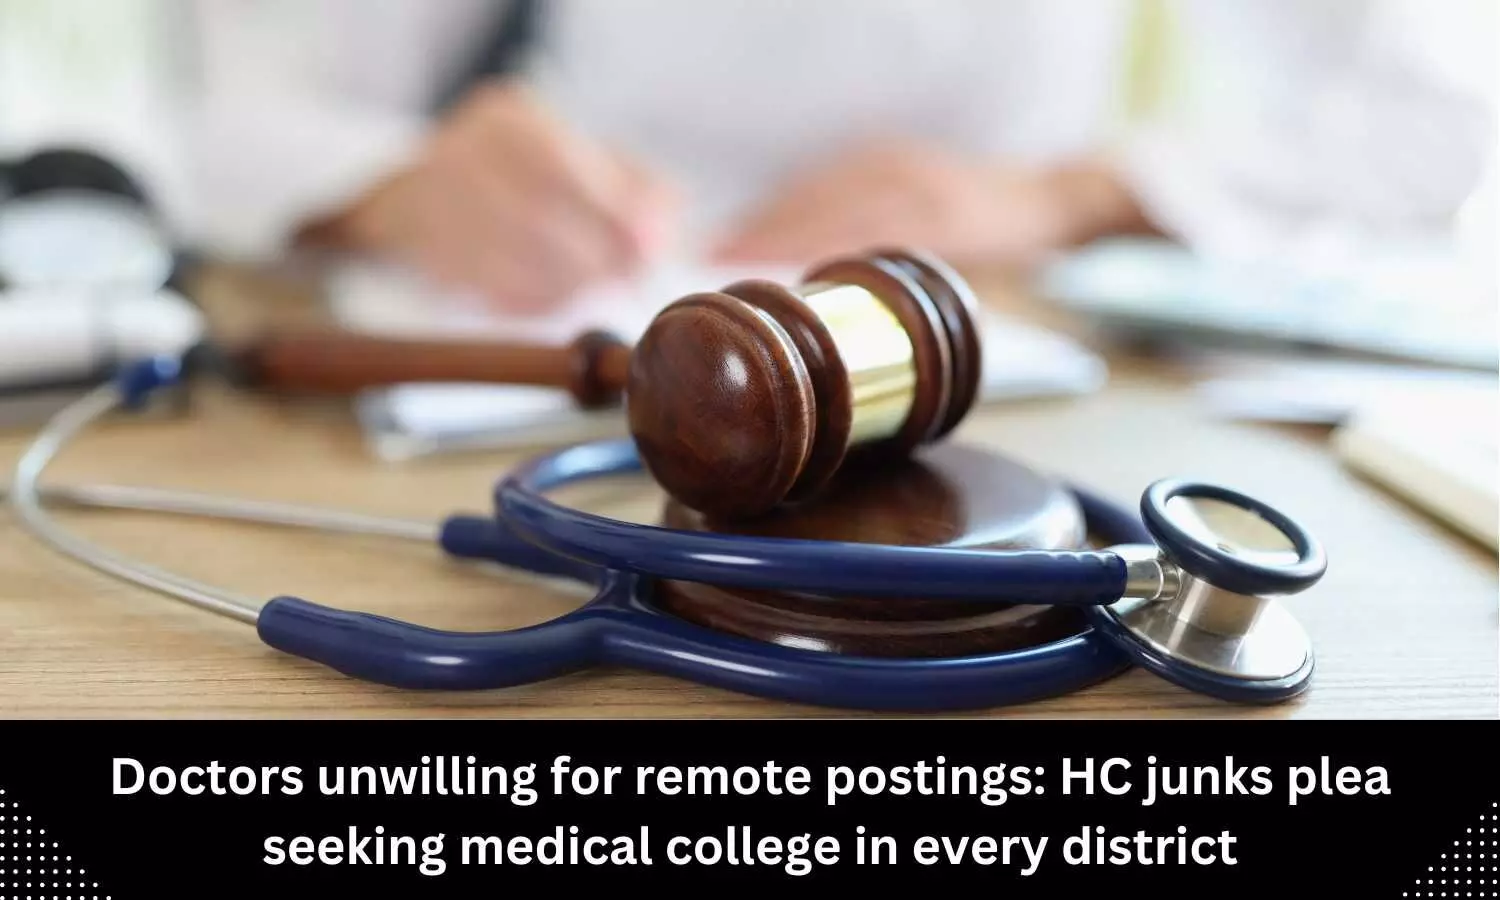 Doctors not willing for remote postings: Uttarakhand HC rejects plea seeking medical college in every district